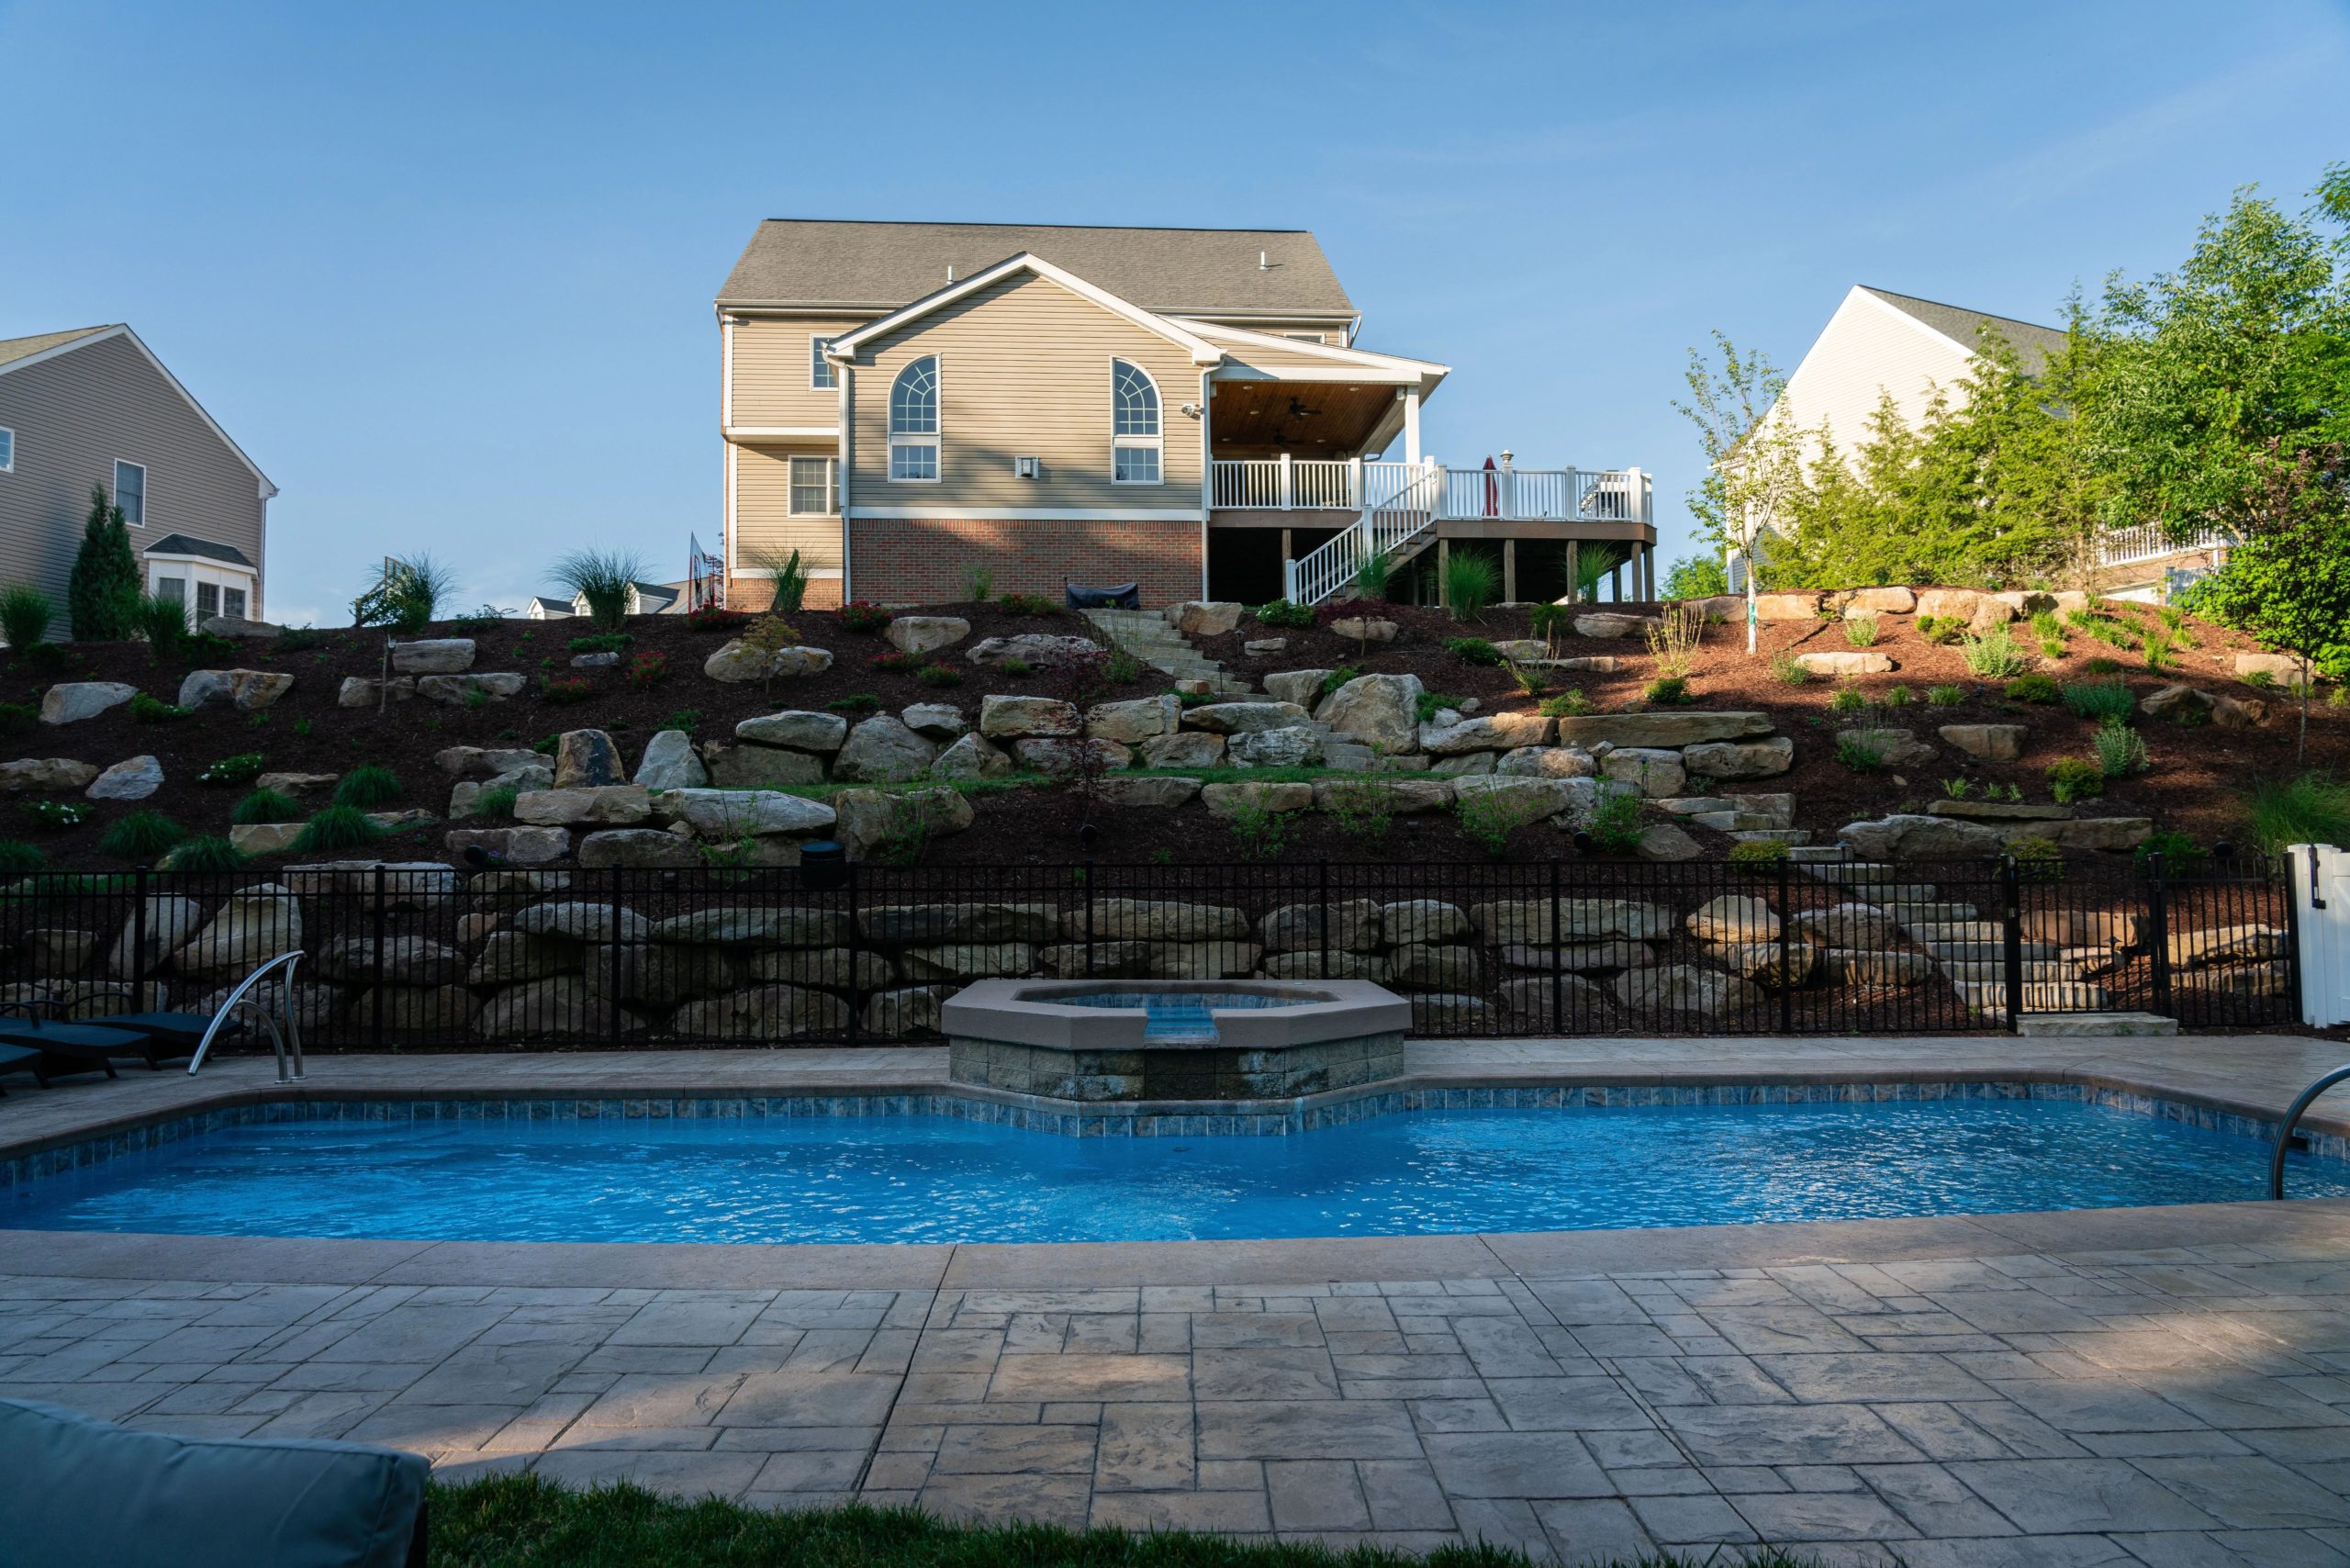 Canonsburg, Pennsylvania - Image Provided By: Pool & Spa Outlet - Shown in Image: Fiberglass Poseidon in Crystite Classic Sapphire Blue